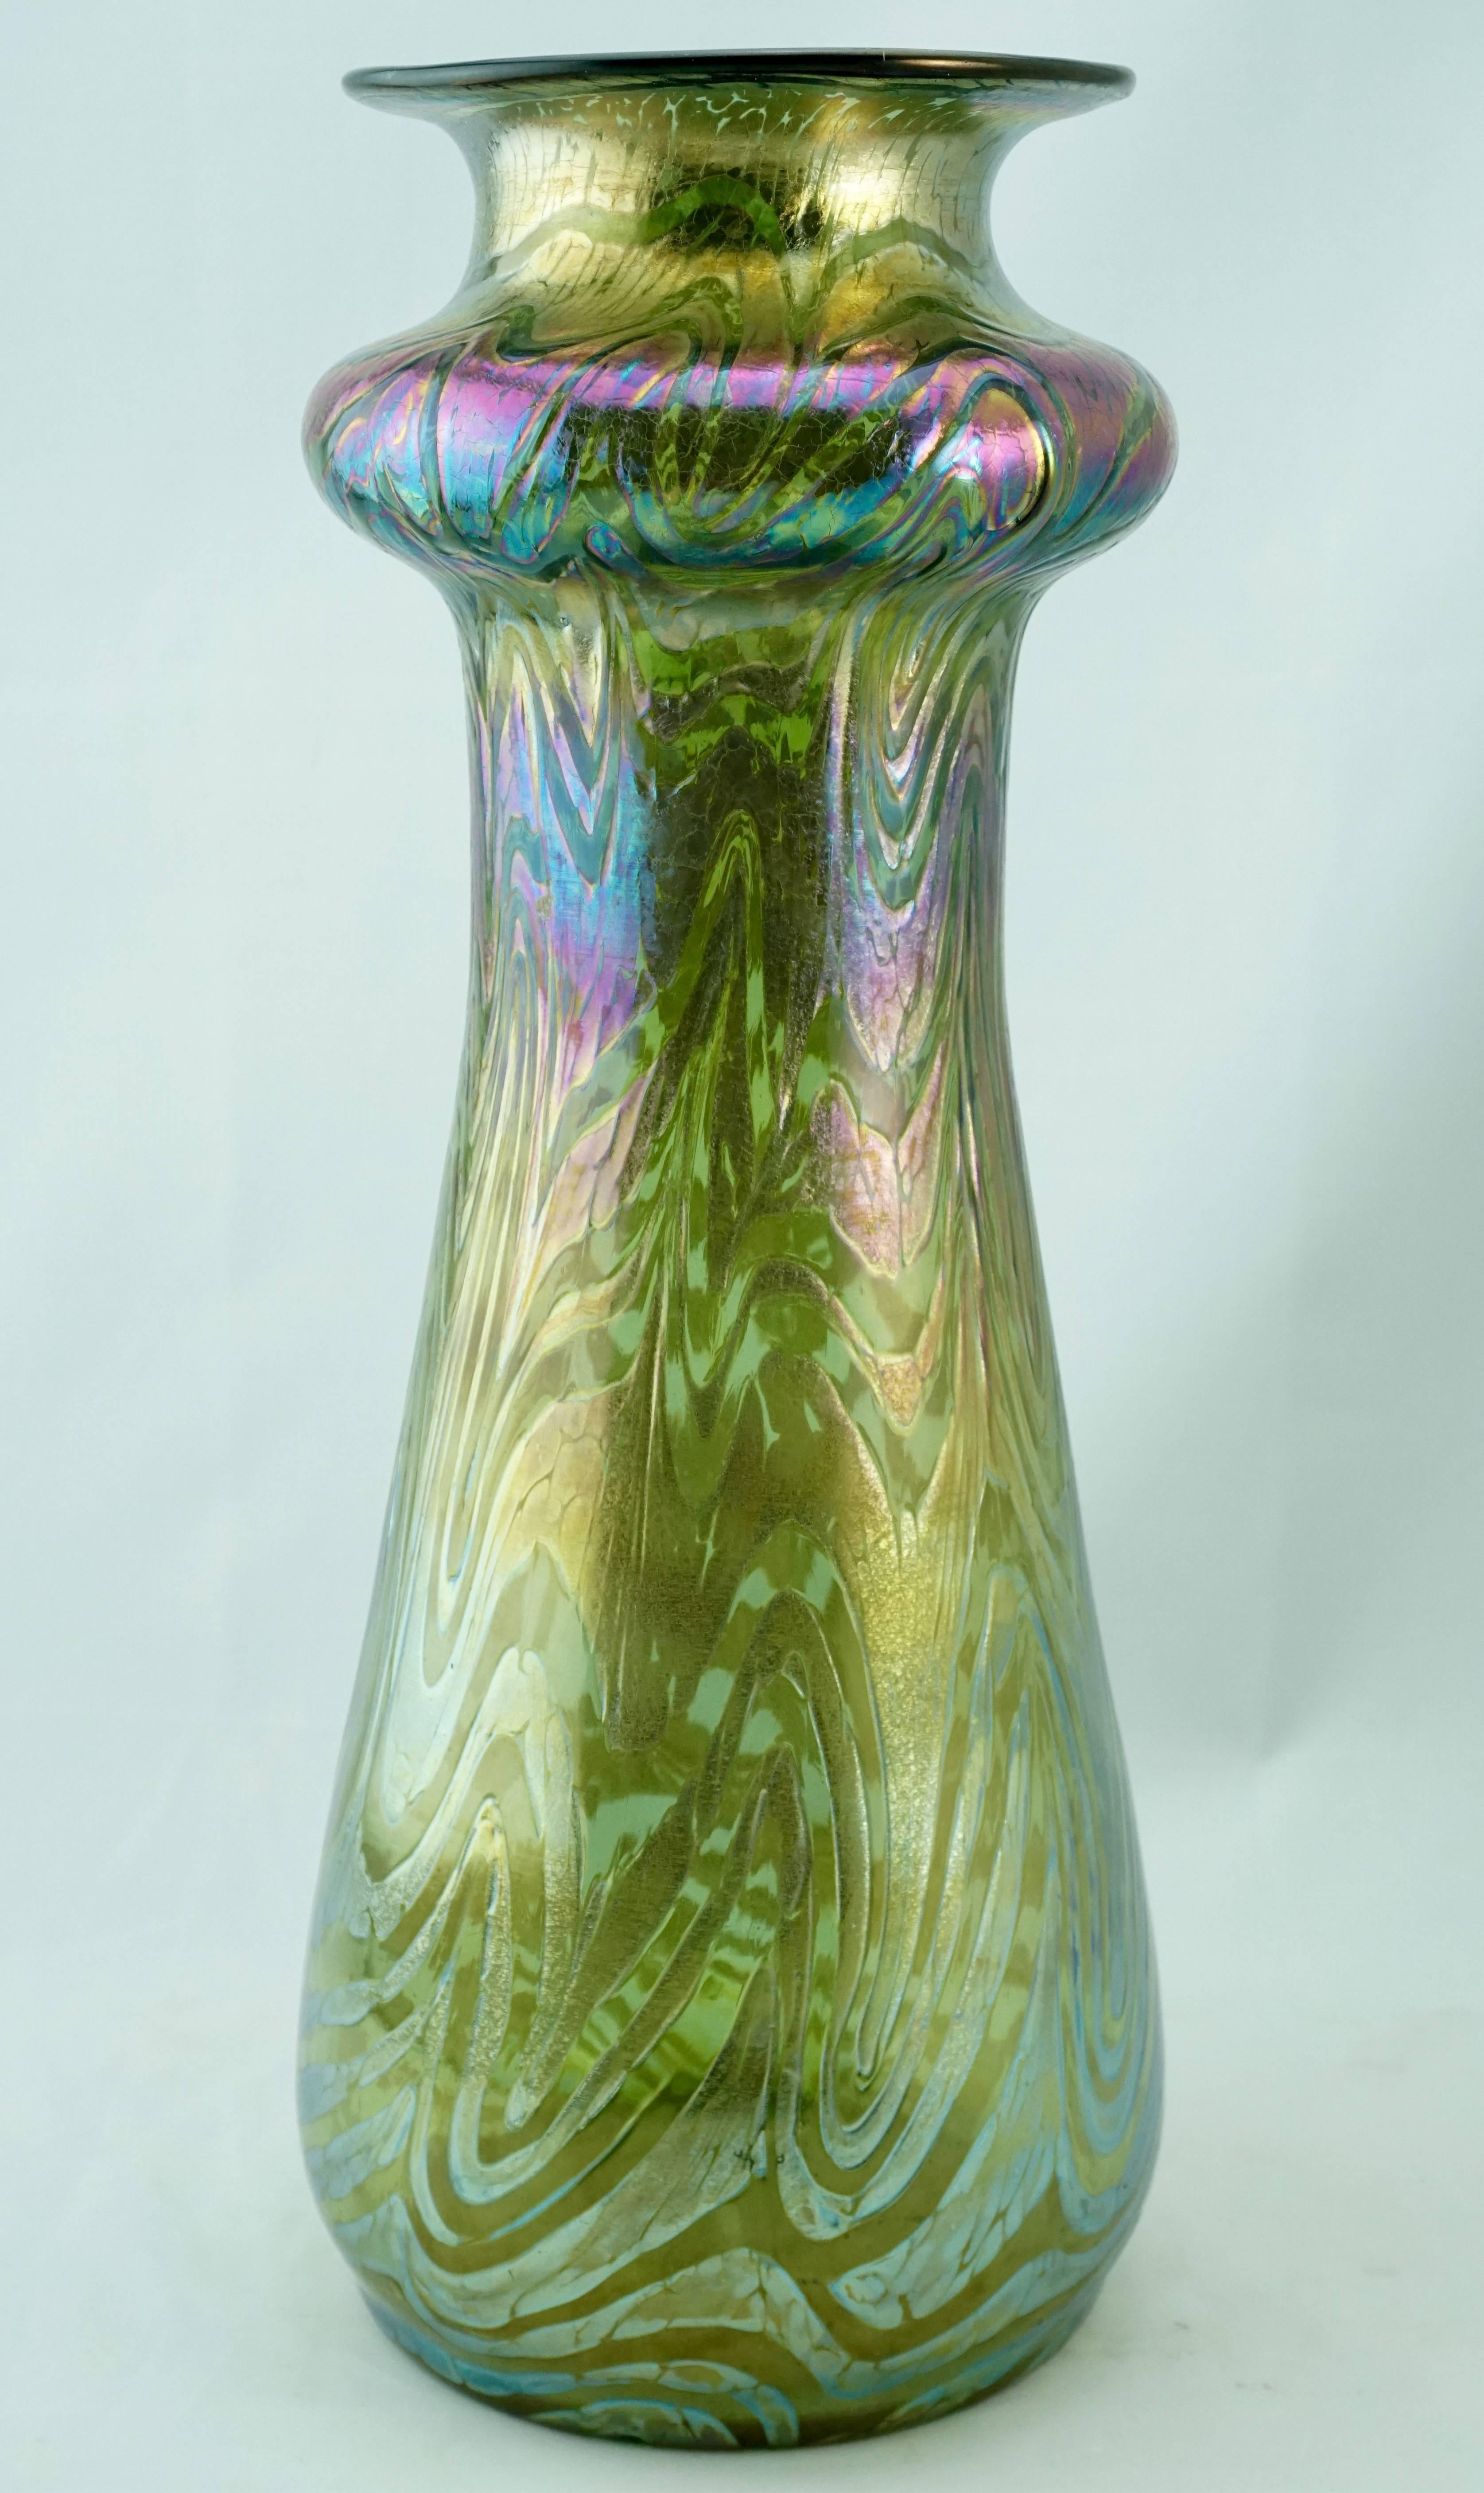 Loetz Austria large Art Nouveau Phaenomen iridescent vase, circa 1900. A green background with silver, blue, gold, purple, orange and red iridescent swirls that made Louis Comfort Tiffany jealous! Very fat and tall vase at 14.25